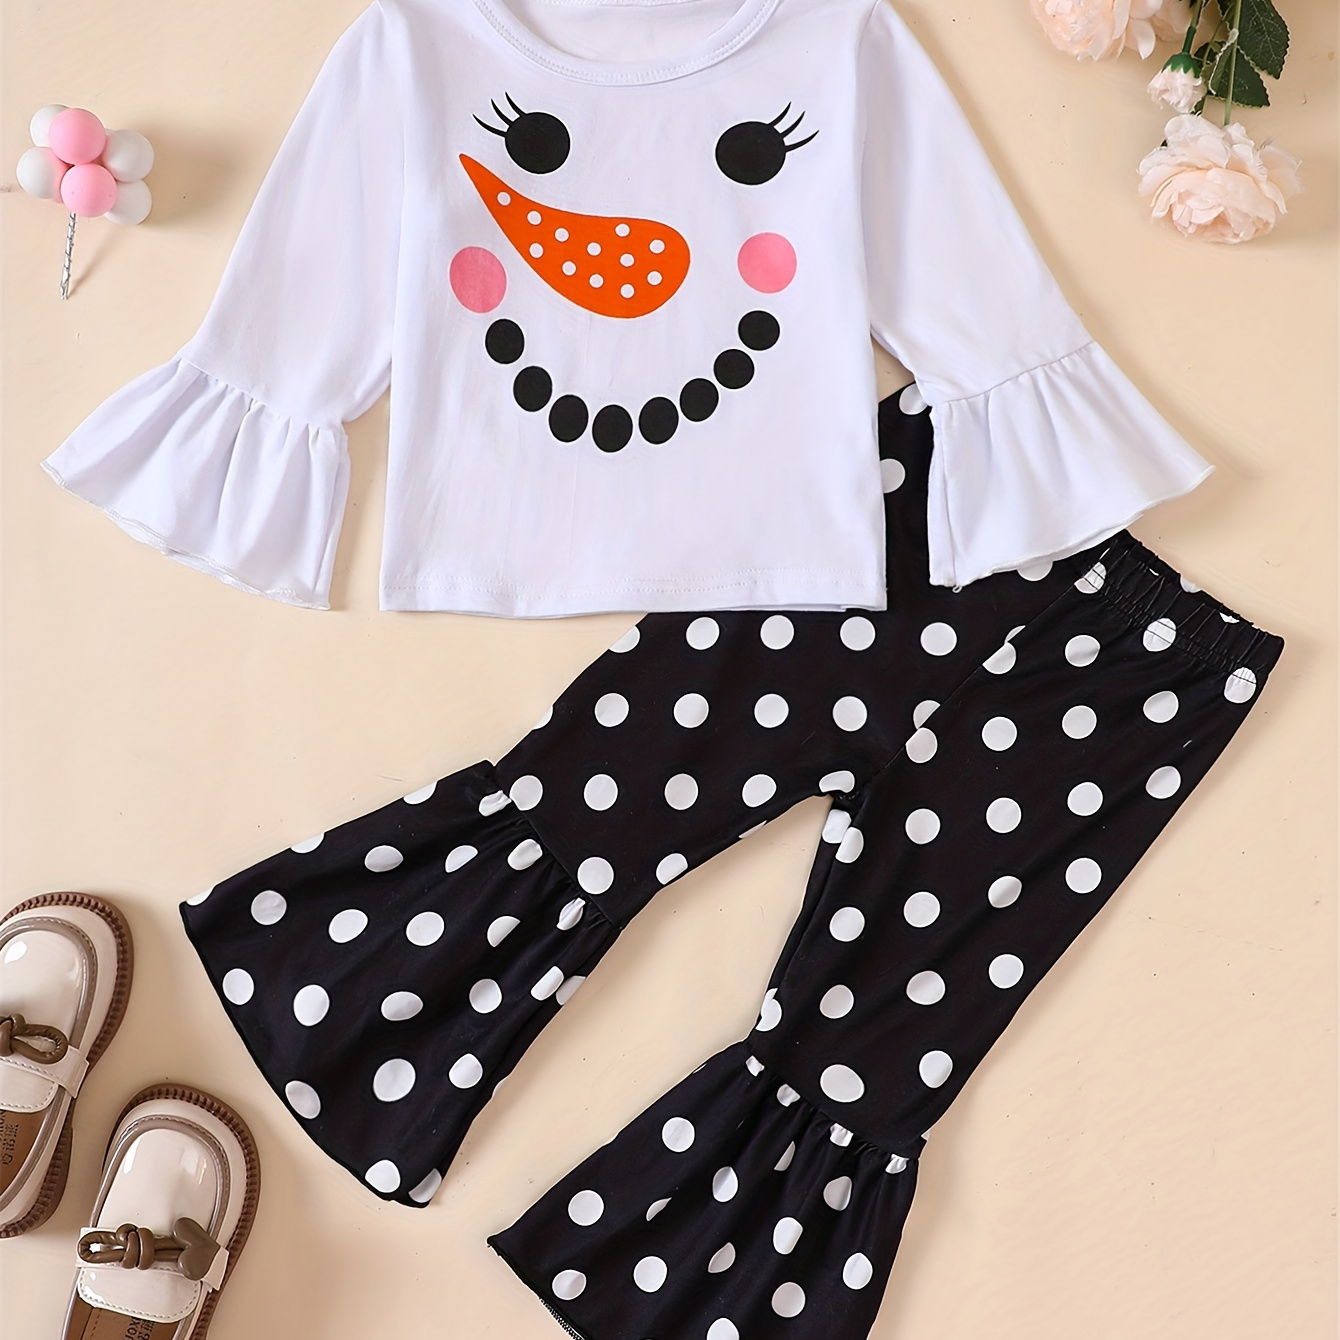 

Girl's Snowman Print Outfit 2pcs, Long Sleeve Top & Polka Dots Pattern Flared Pants Set, Kid's Clothes For Spring Fall